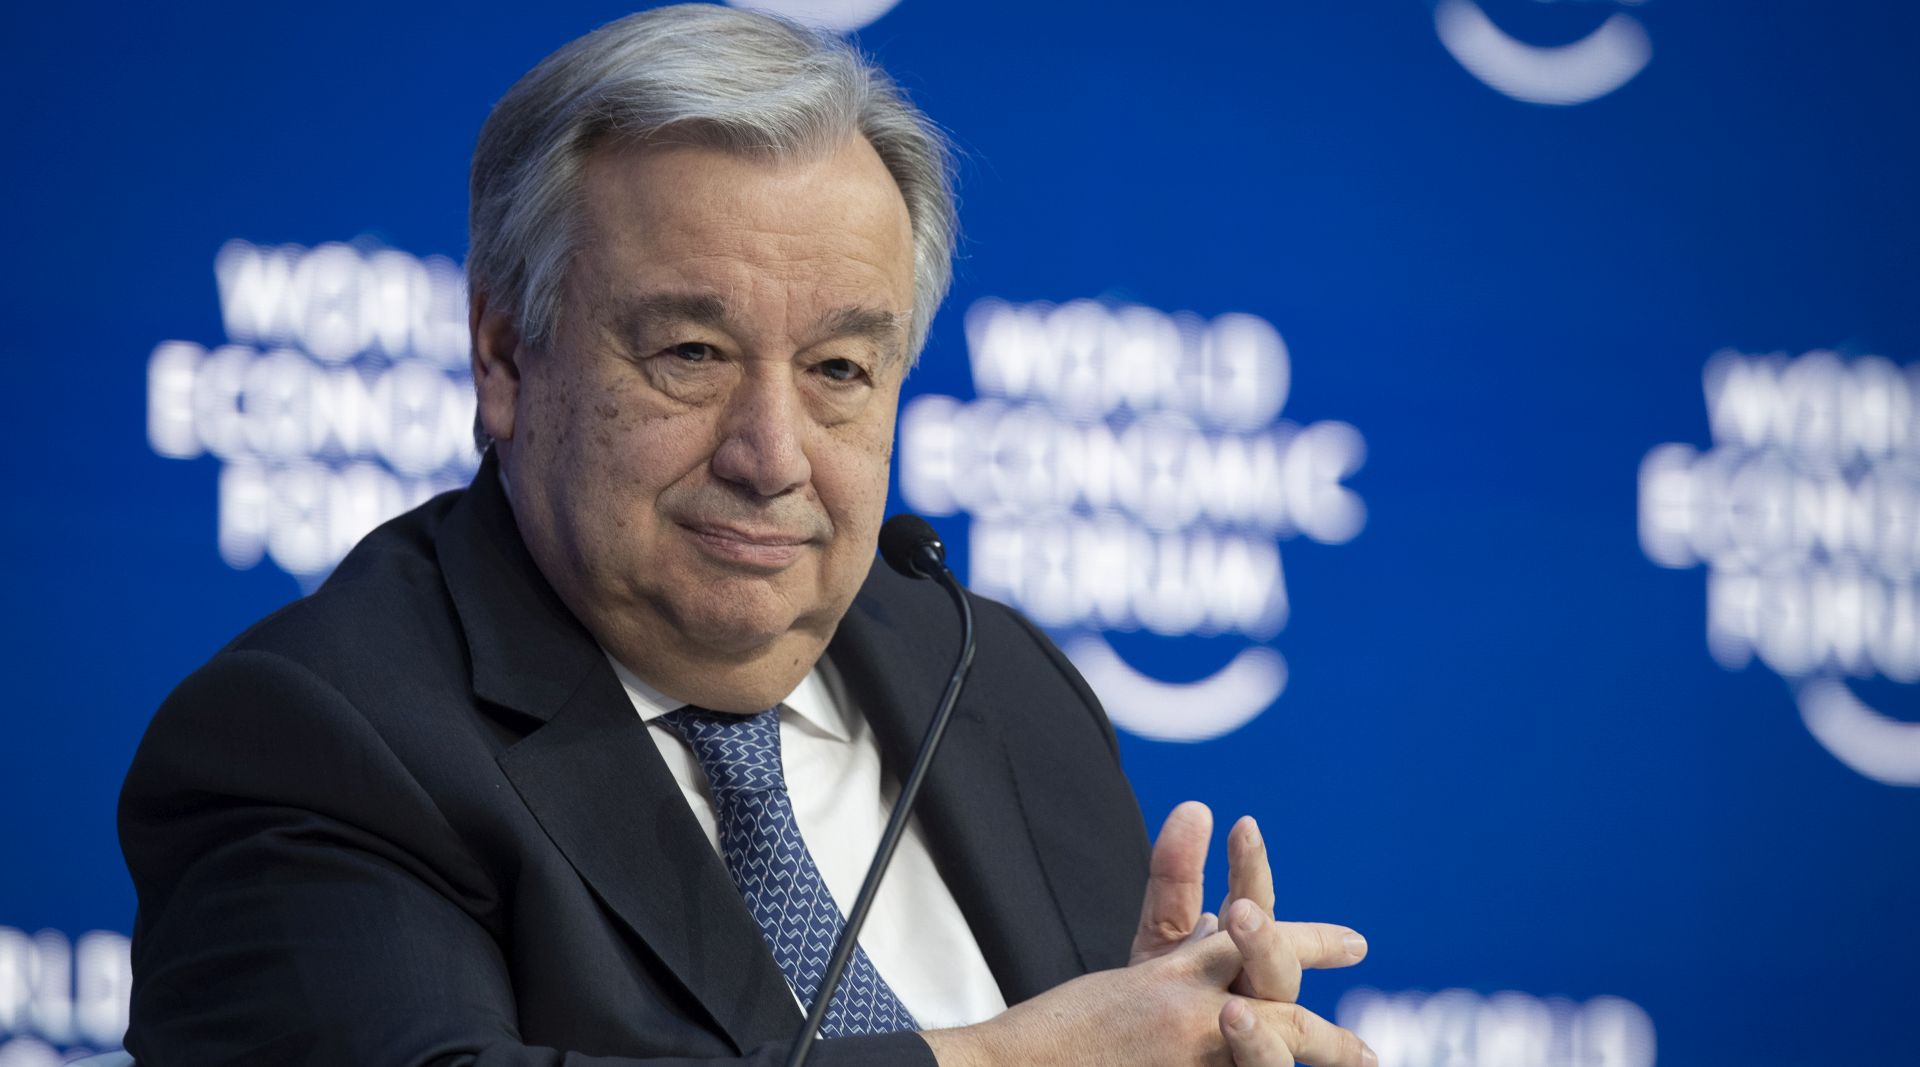 epa07314875 United Nations Secretary General Antonio Guterres attends a plenary session at the 49th annual meeting of the World Economic Forum, WEF, in Davos, Switzerland, 24 January 2019. The meeting brings together entrepreneurs, scientists, corporate and political leaders in Davos under the topic 'Globalization 4.0' from 22 - 25 January 2019.  EPA/LAURENT GILLIERON